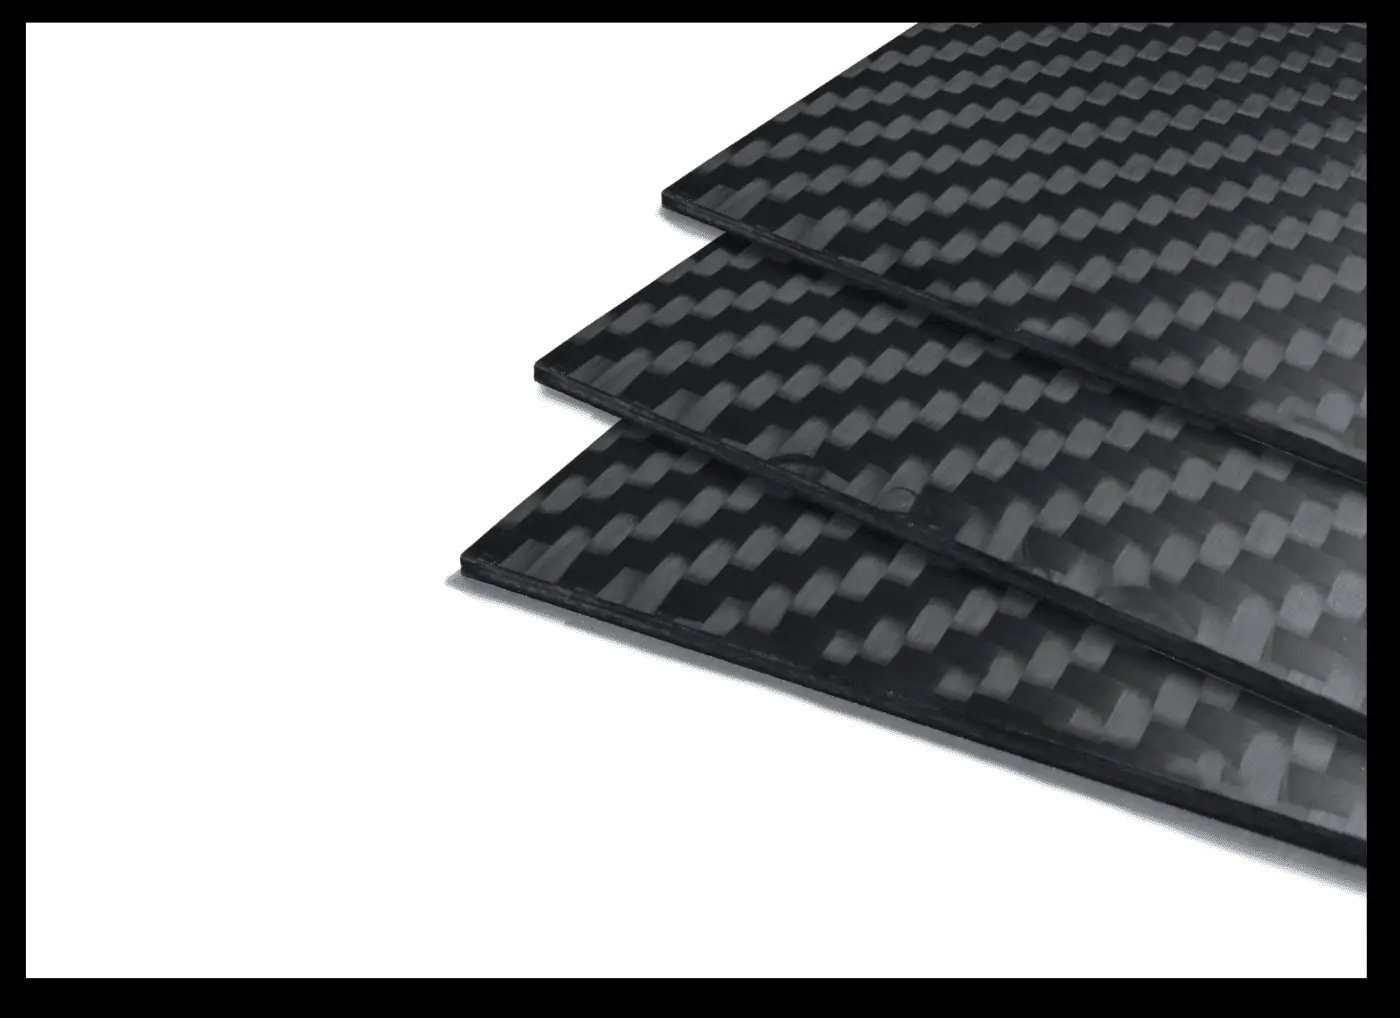 Three sheets of cfrp carbon fiber material on top of one another